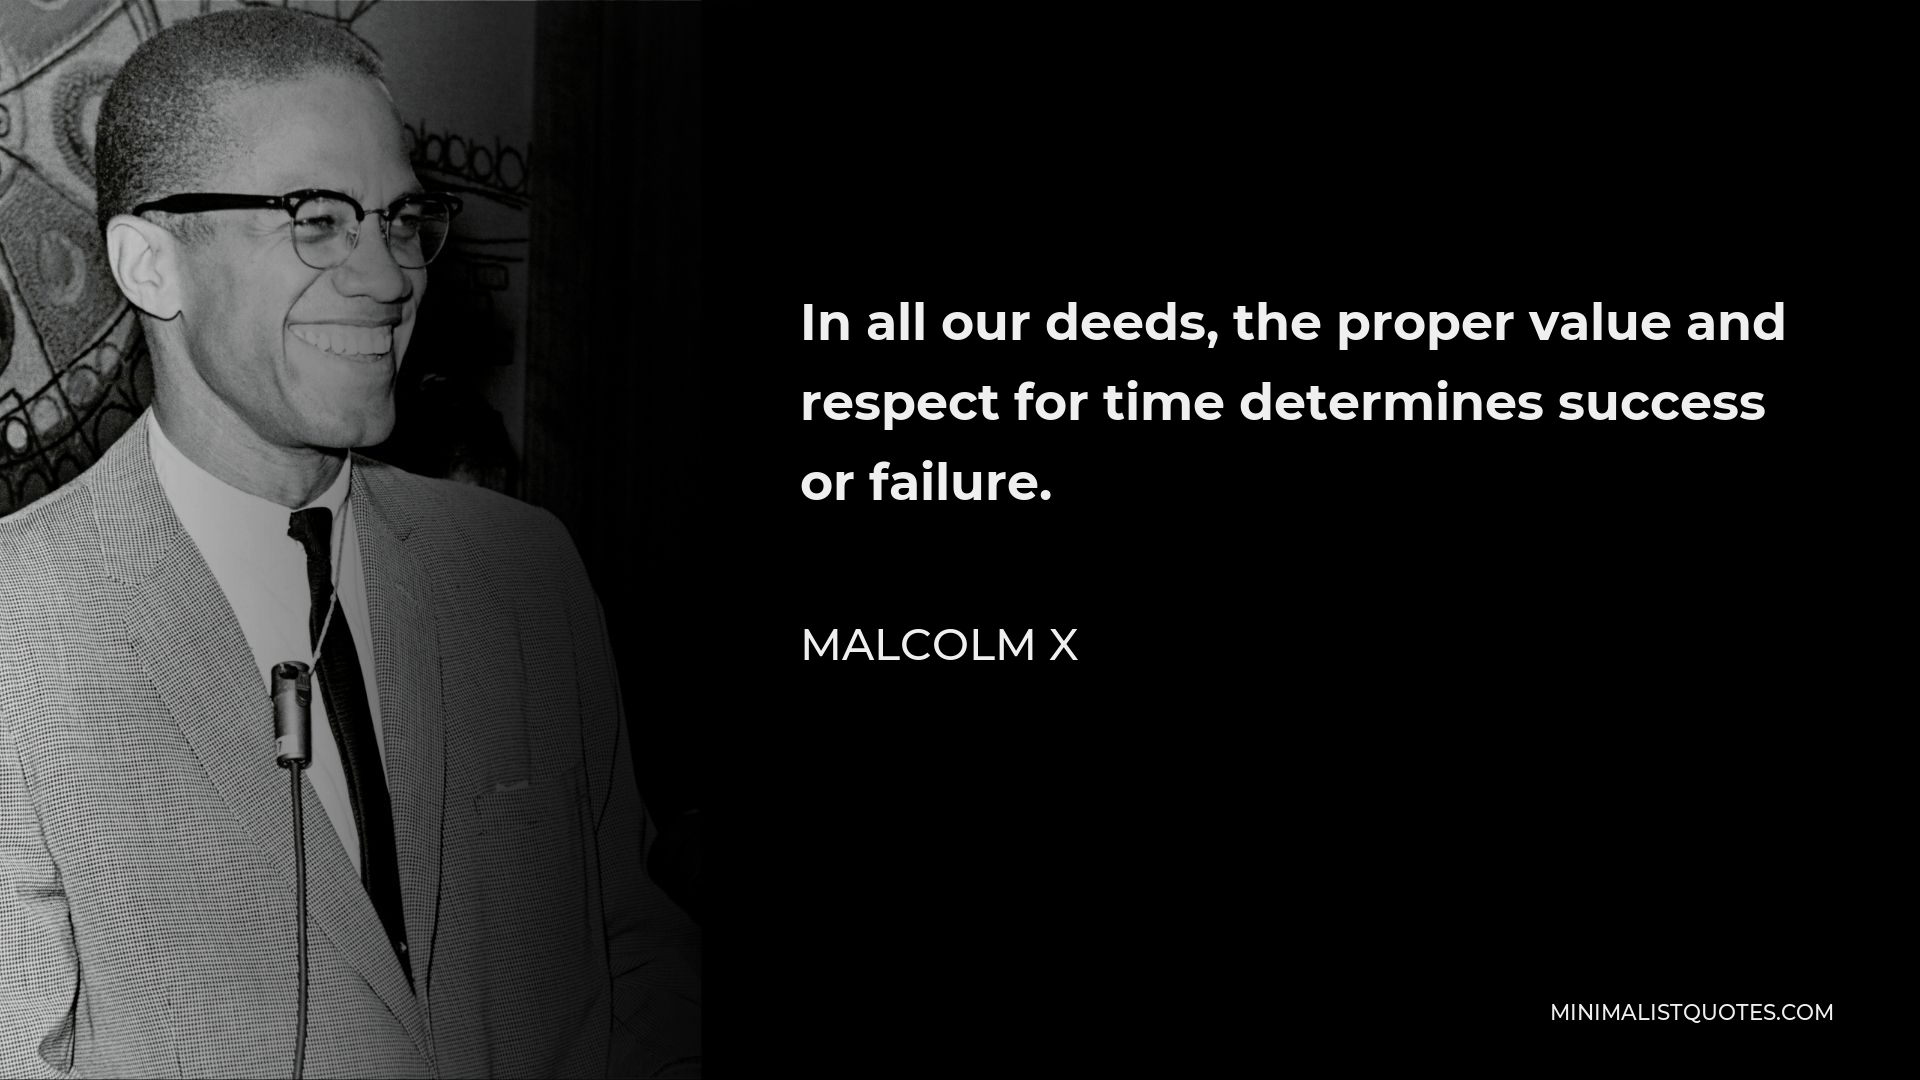 Malcolm X Quote - In all our deeds, the proper value and respect for time determines success or failure.